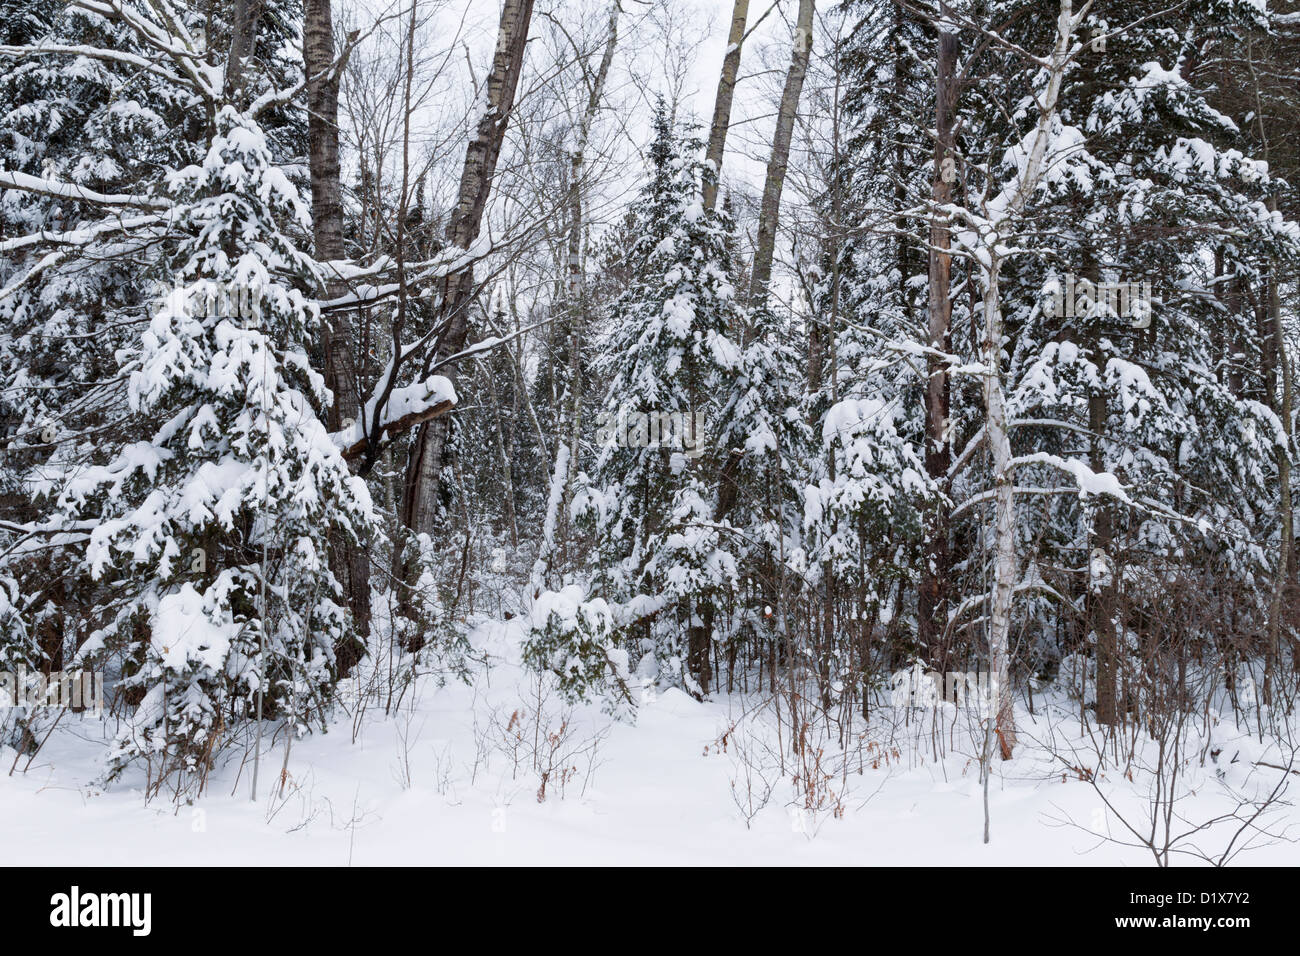 Typical wooded Northern Minnesota terrain in winter - Chippewa National Forest. Stock Photo